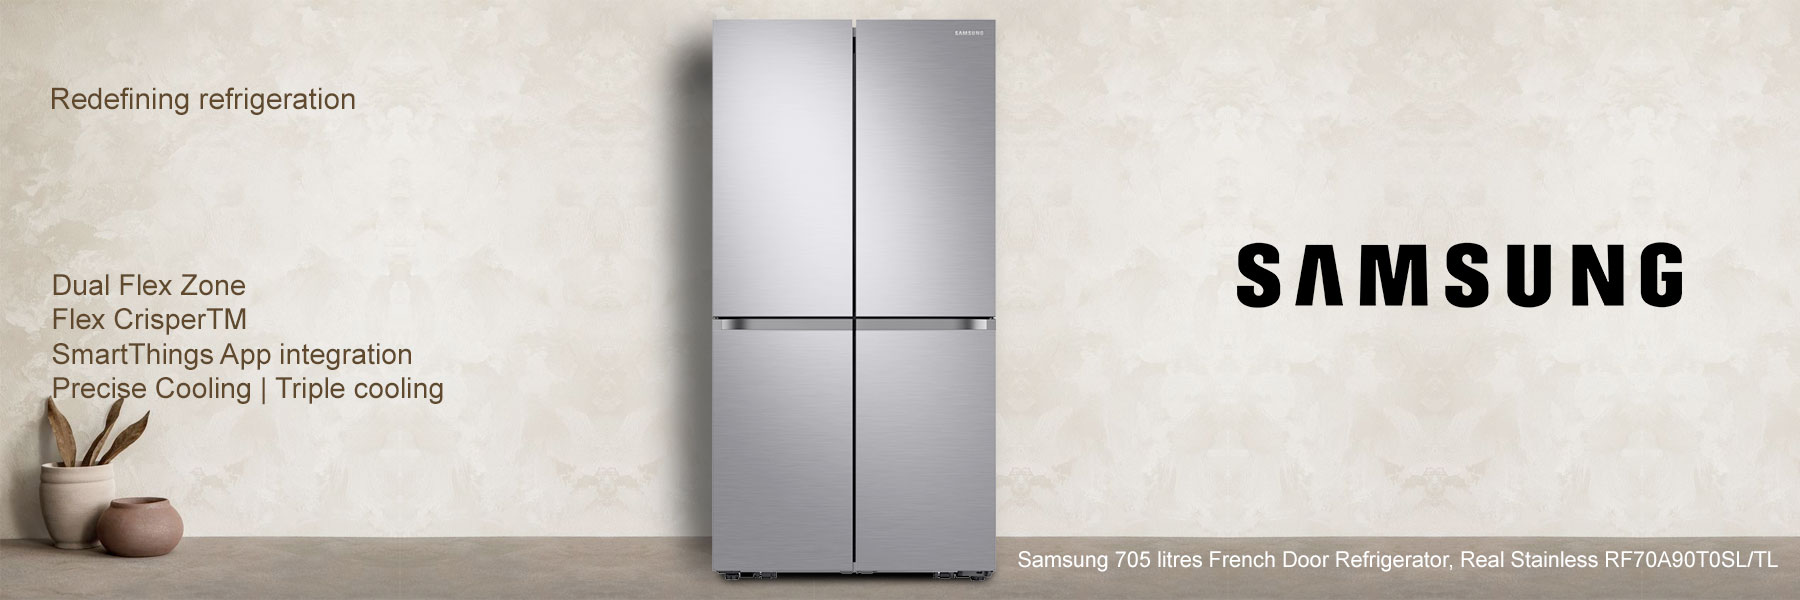 Samsung 705 litres French Door Refrigerator, Real Stainless RF70A90T0SL/TL